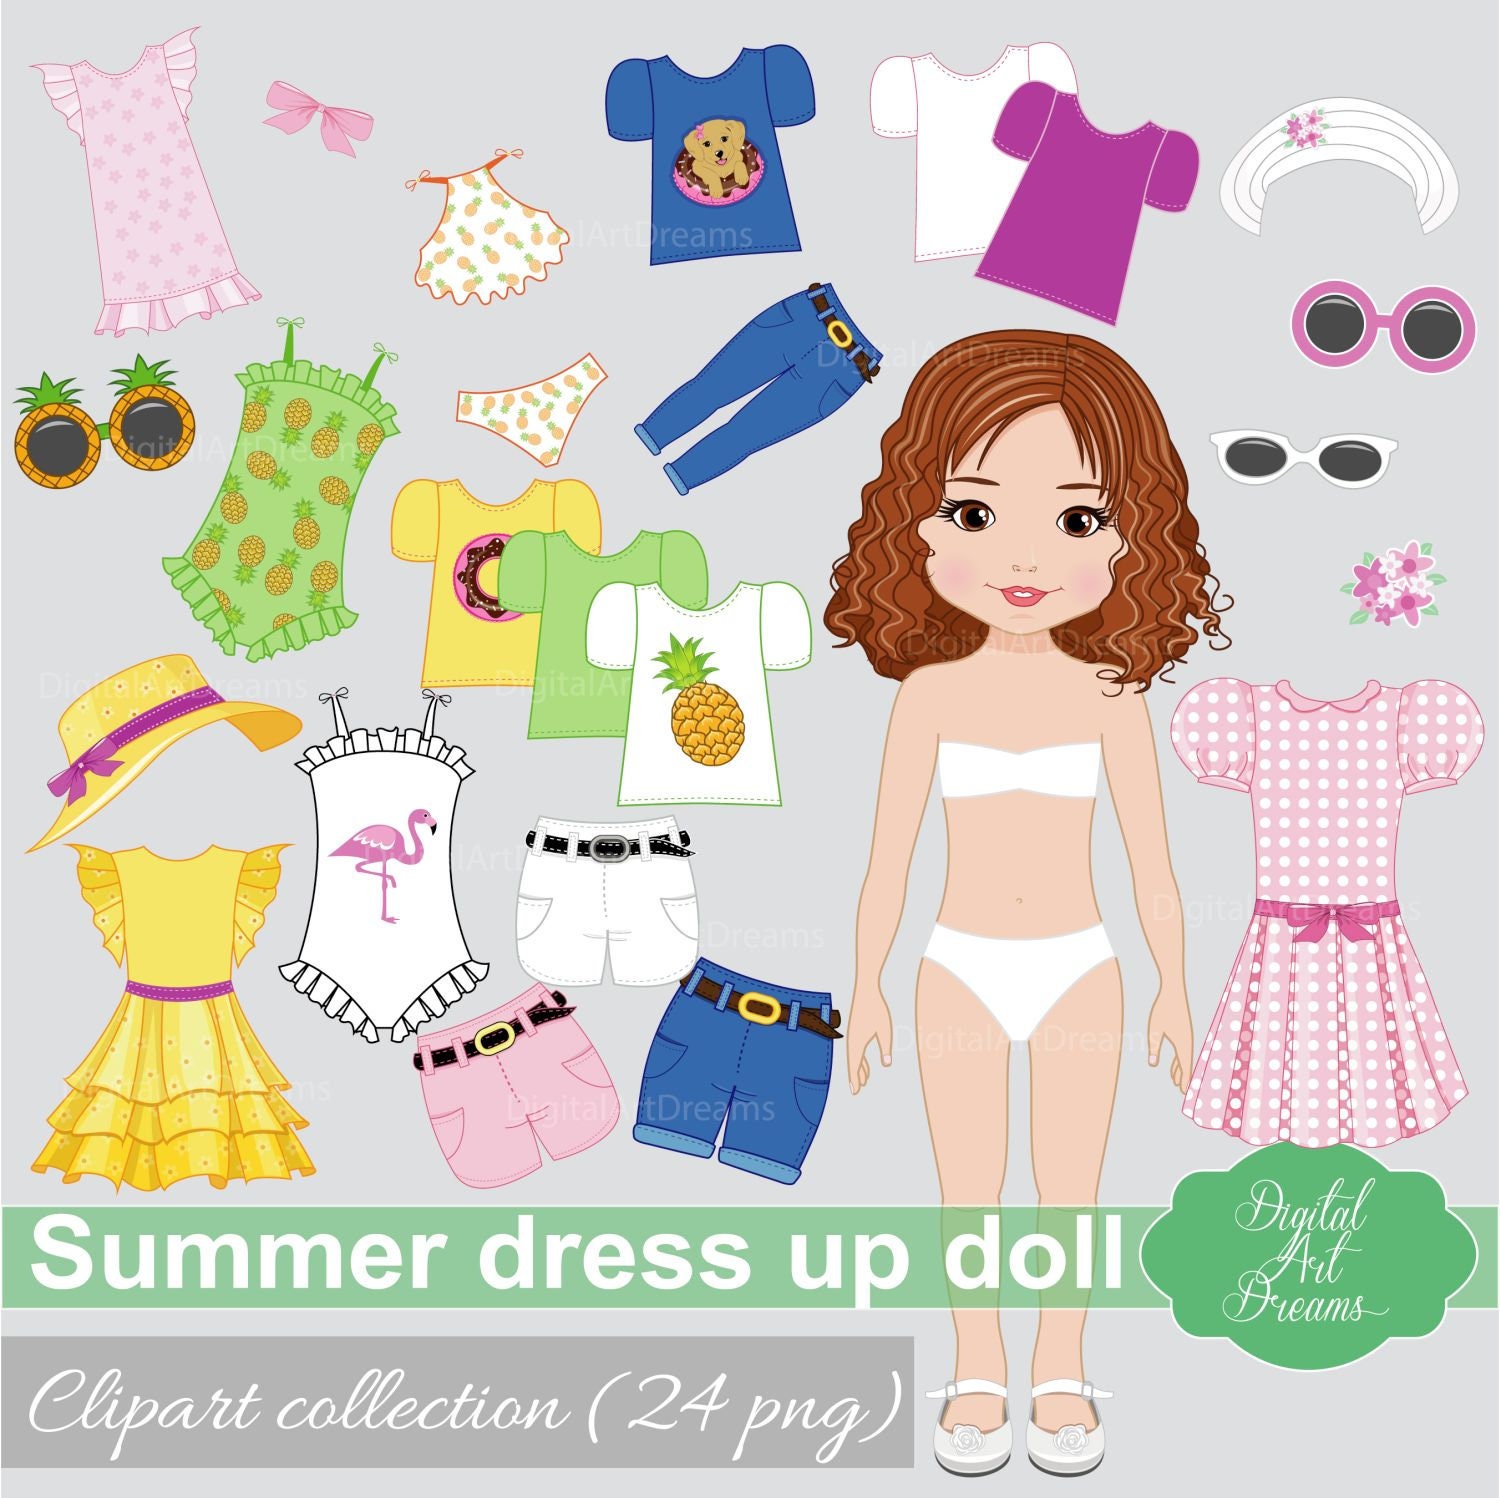 Paper Doll Printable Cut Out Clothes Fashion Girl Clipart Paper